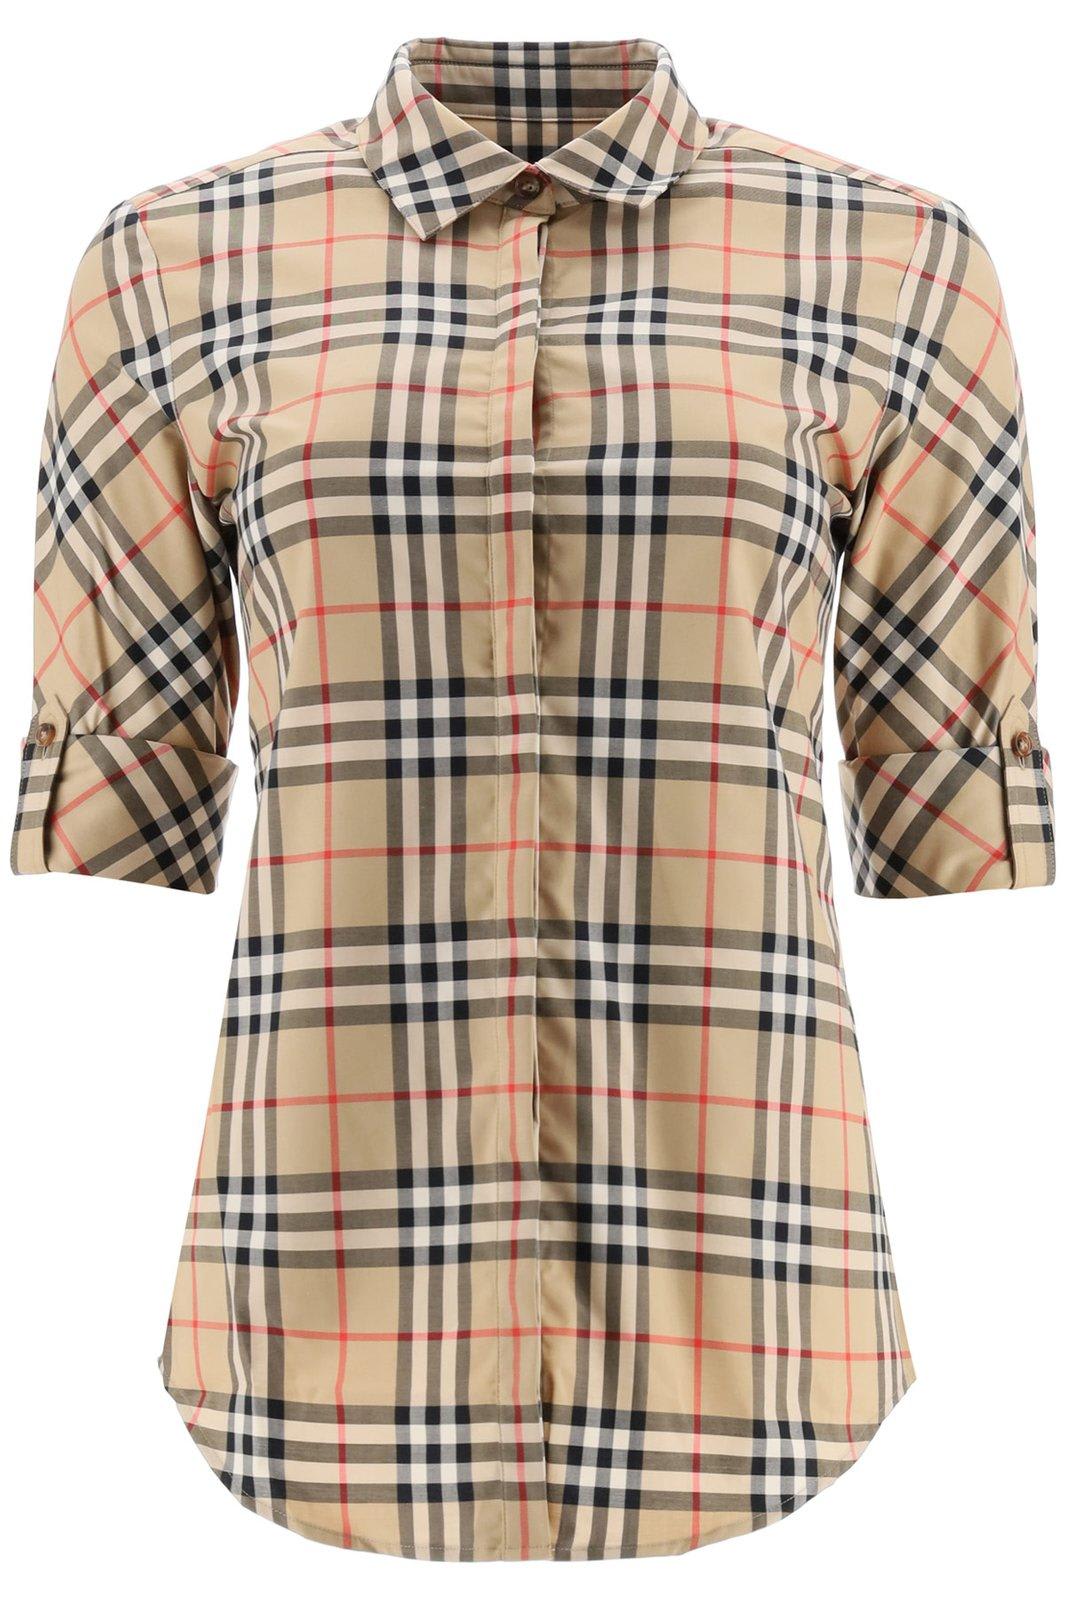 BURBERRY VINTAGE CHECKED SHORT-SLEEVED SHIRT